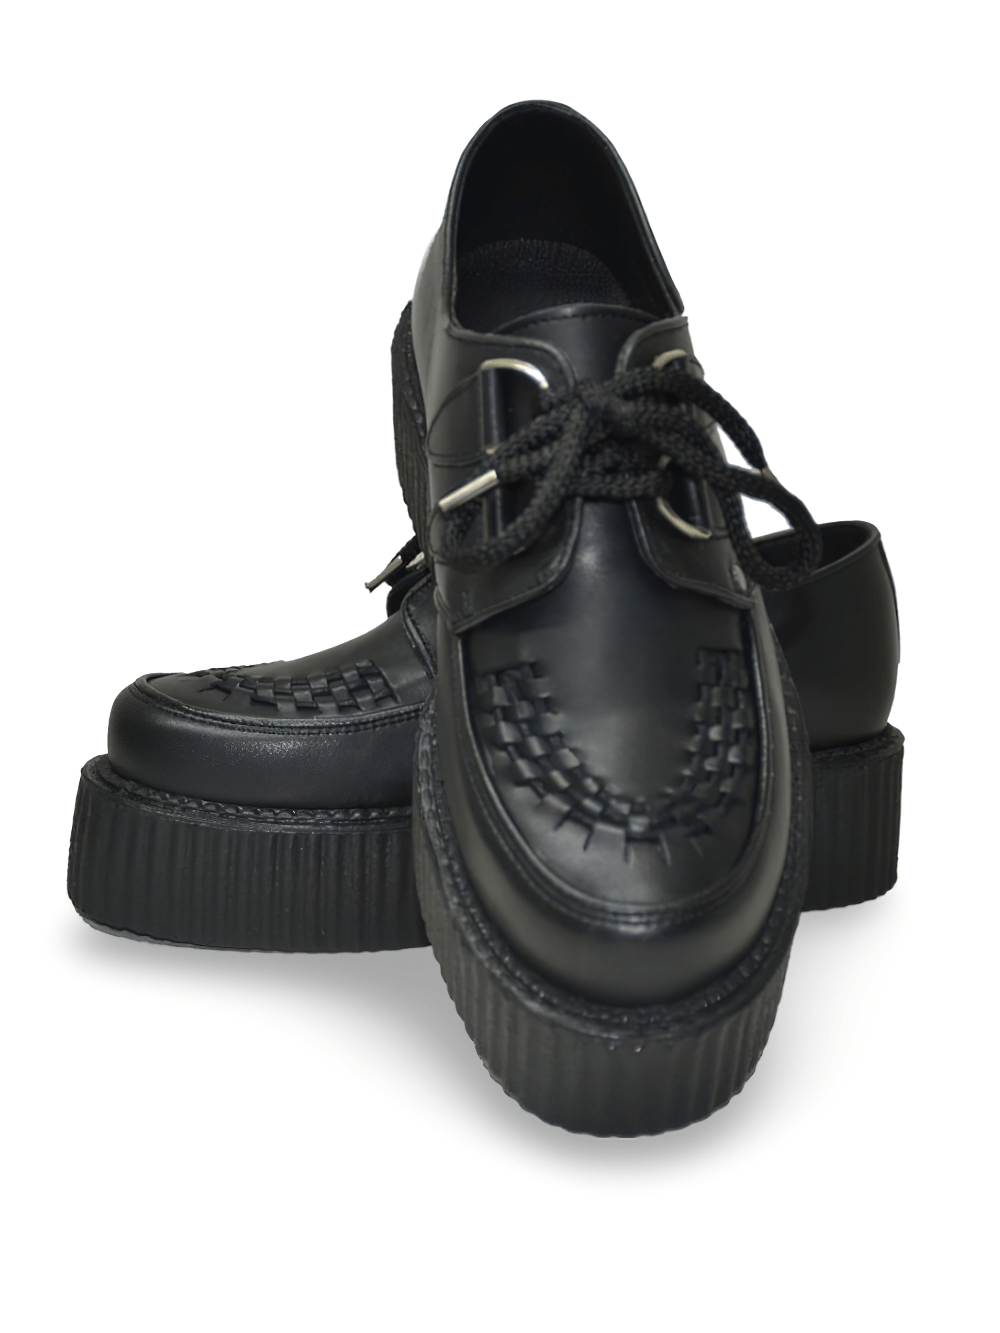 Grained Leather Black Creepers with Round Toe